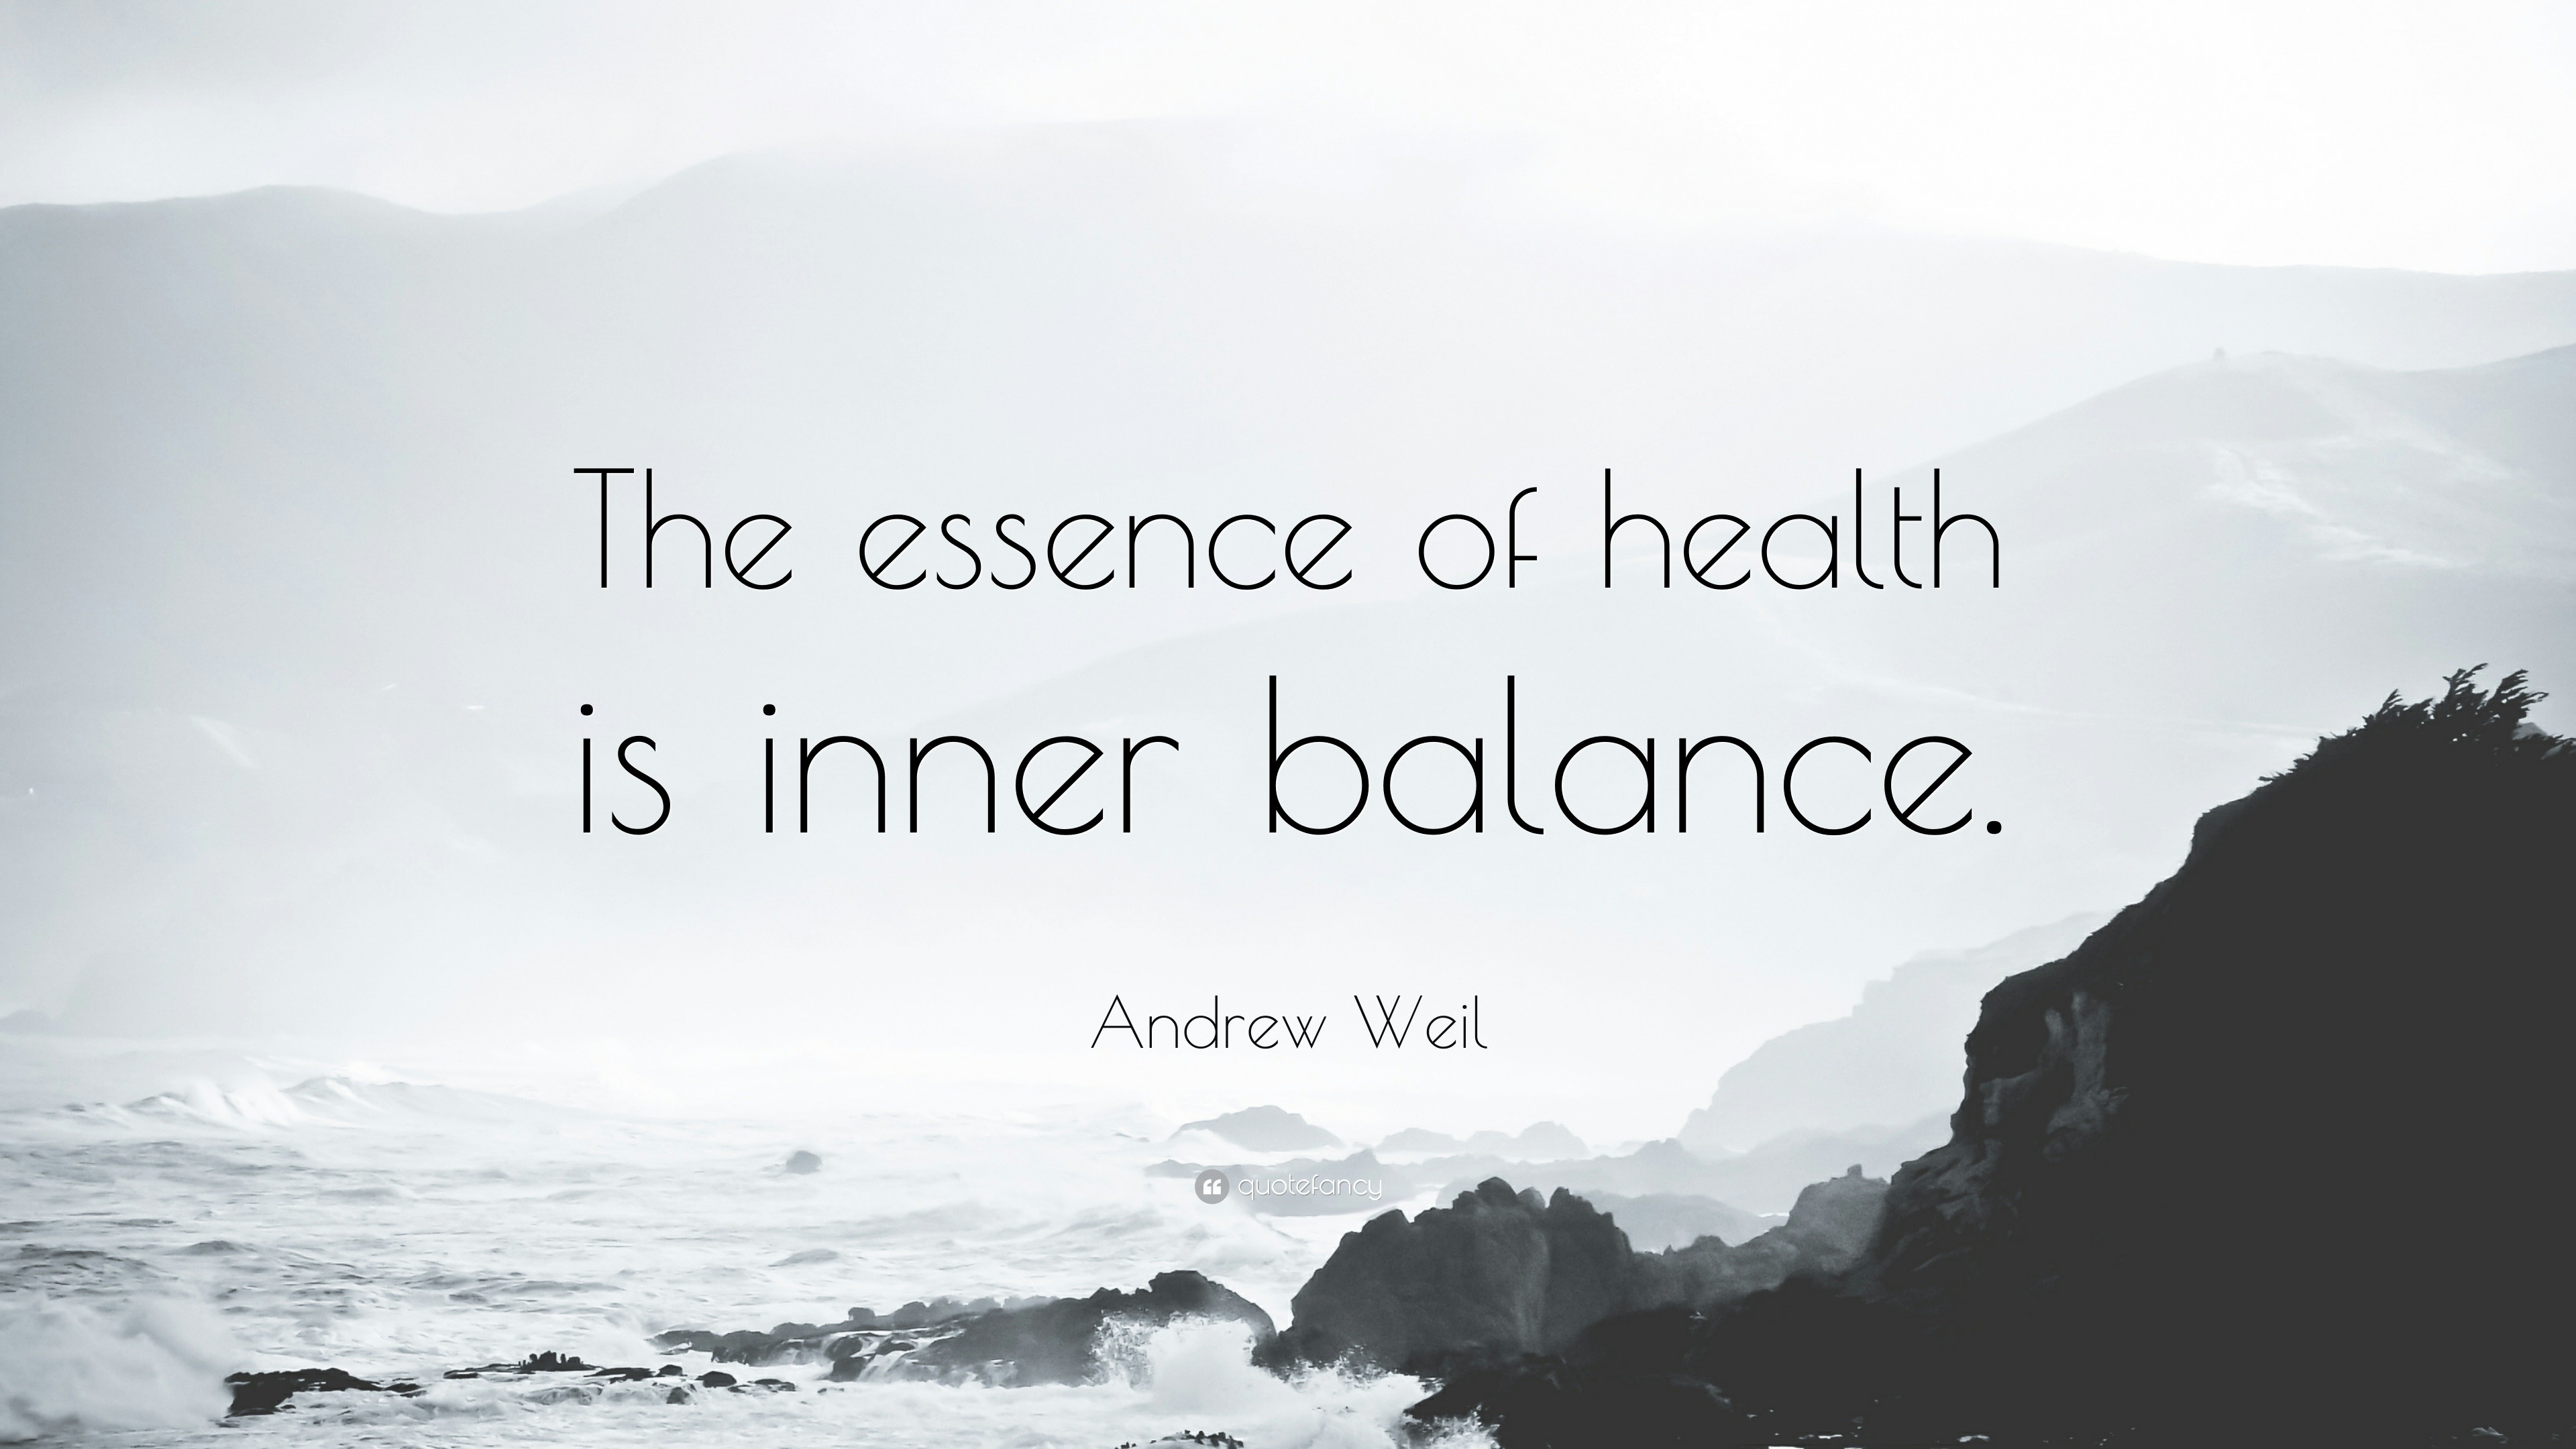 Andrew Weil Quotes (95 wallpapers) - Quotefancy